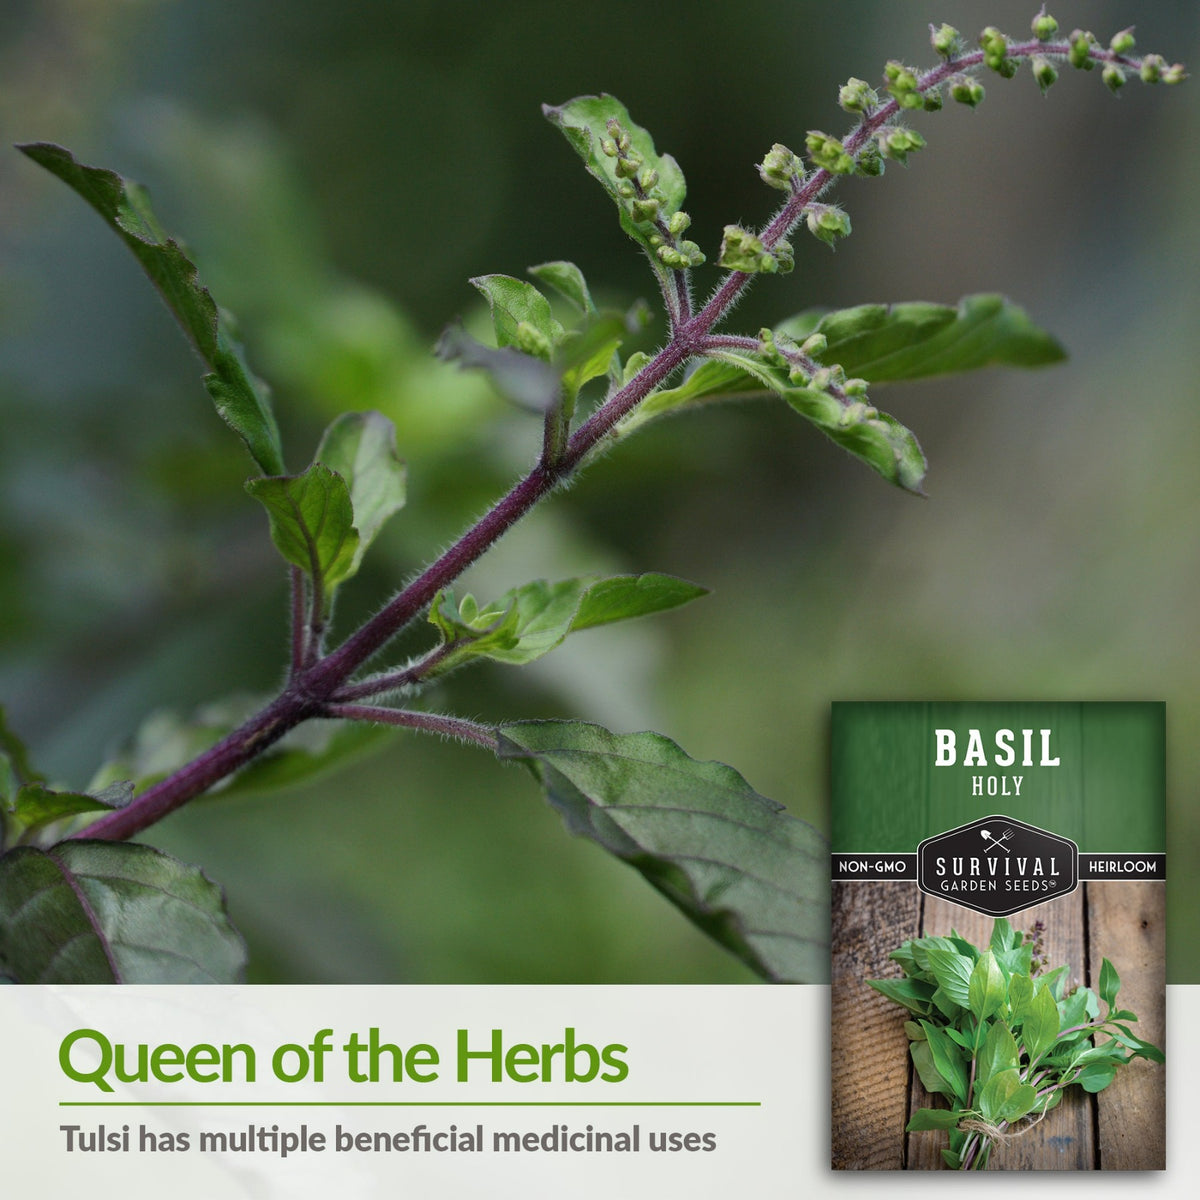 Holy Basil or Tulsi has multiple beneficial medicinal uses